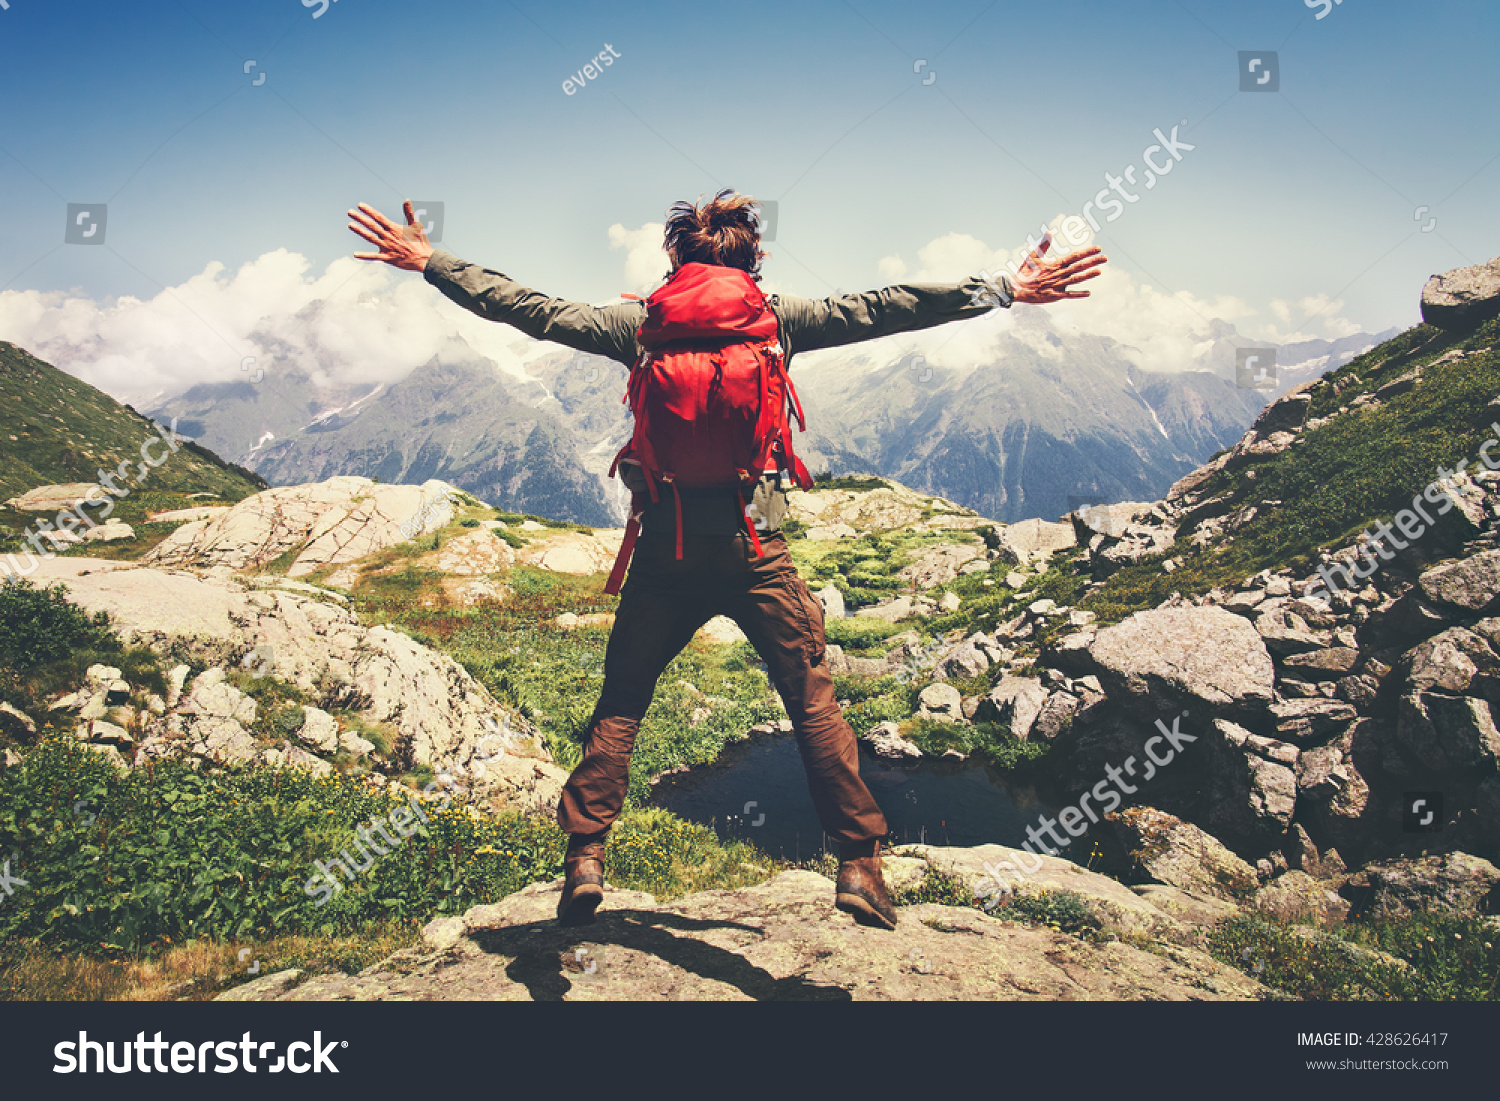 Traveler Man with backpack jumping hands raised mountains landscape on background Lifestyle Travel happy emotions success concept summer vacations outdoor
 #428626417